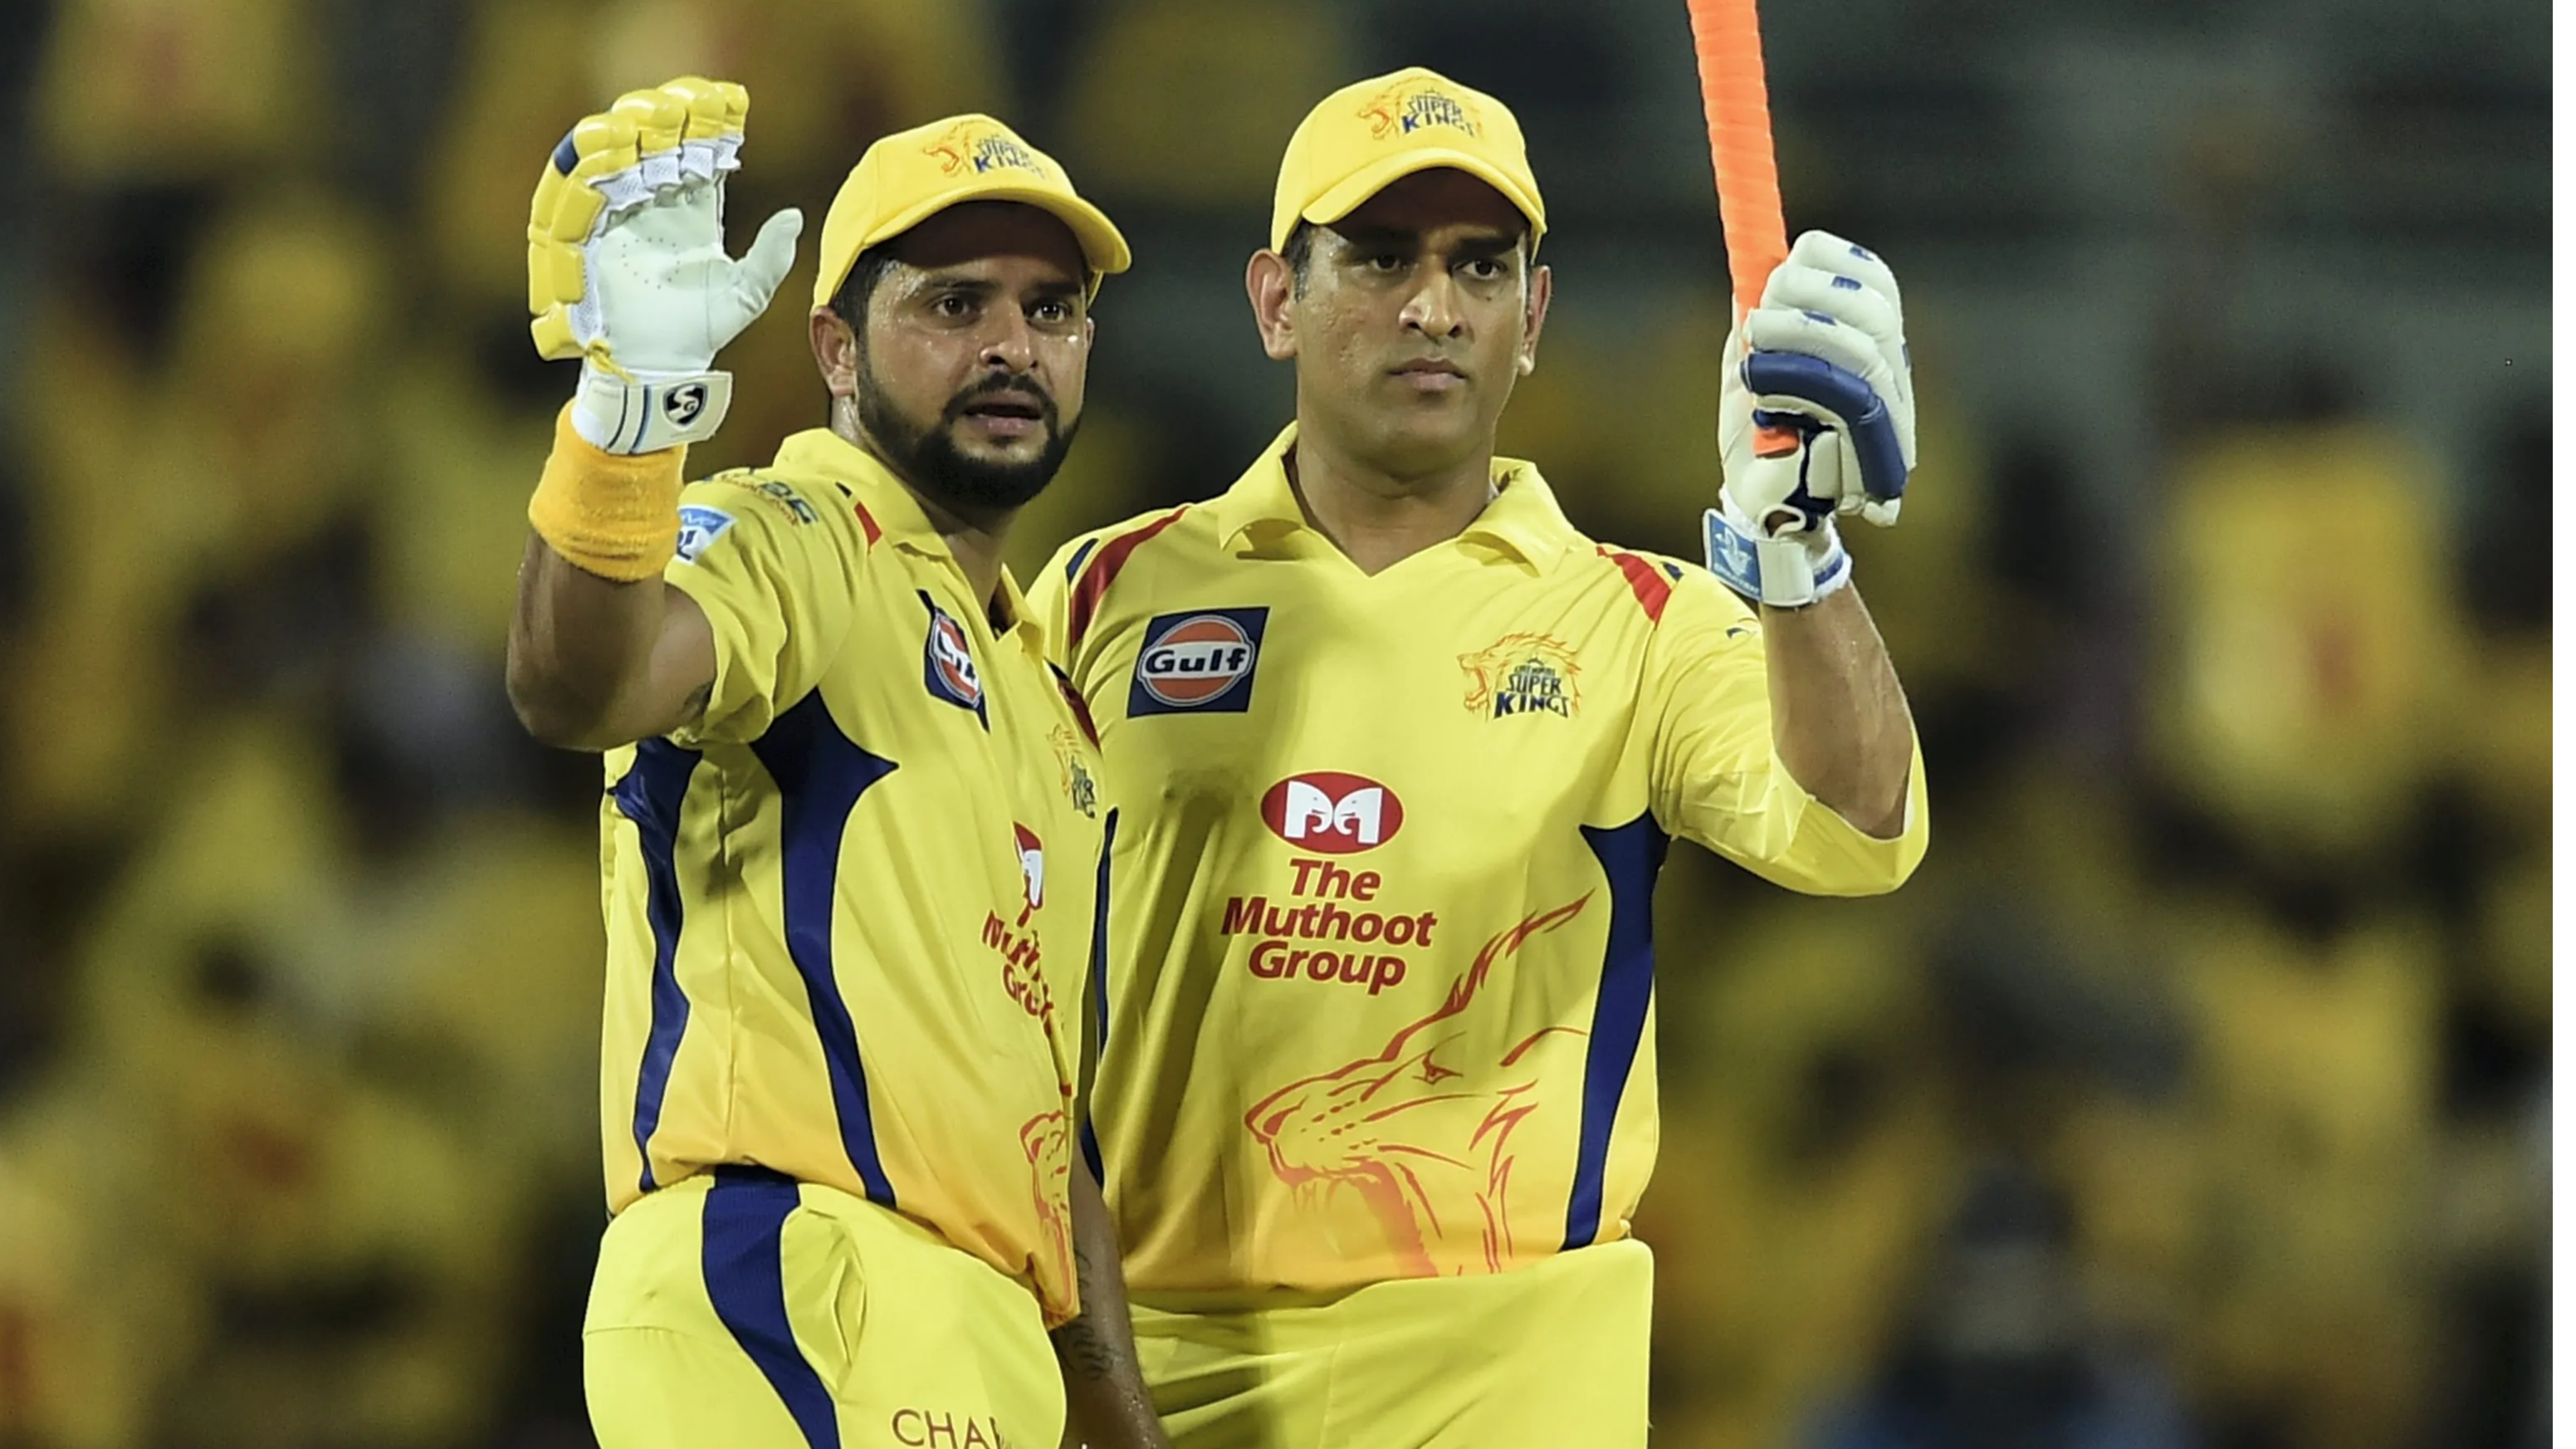 Cricketer Suresh Raina may not don the CSK jersey in IPL 2021: Report